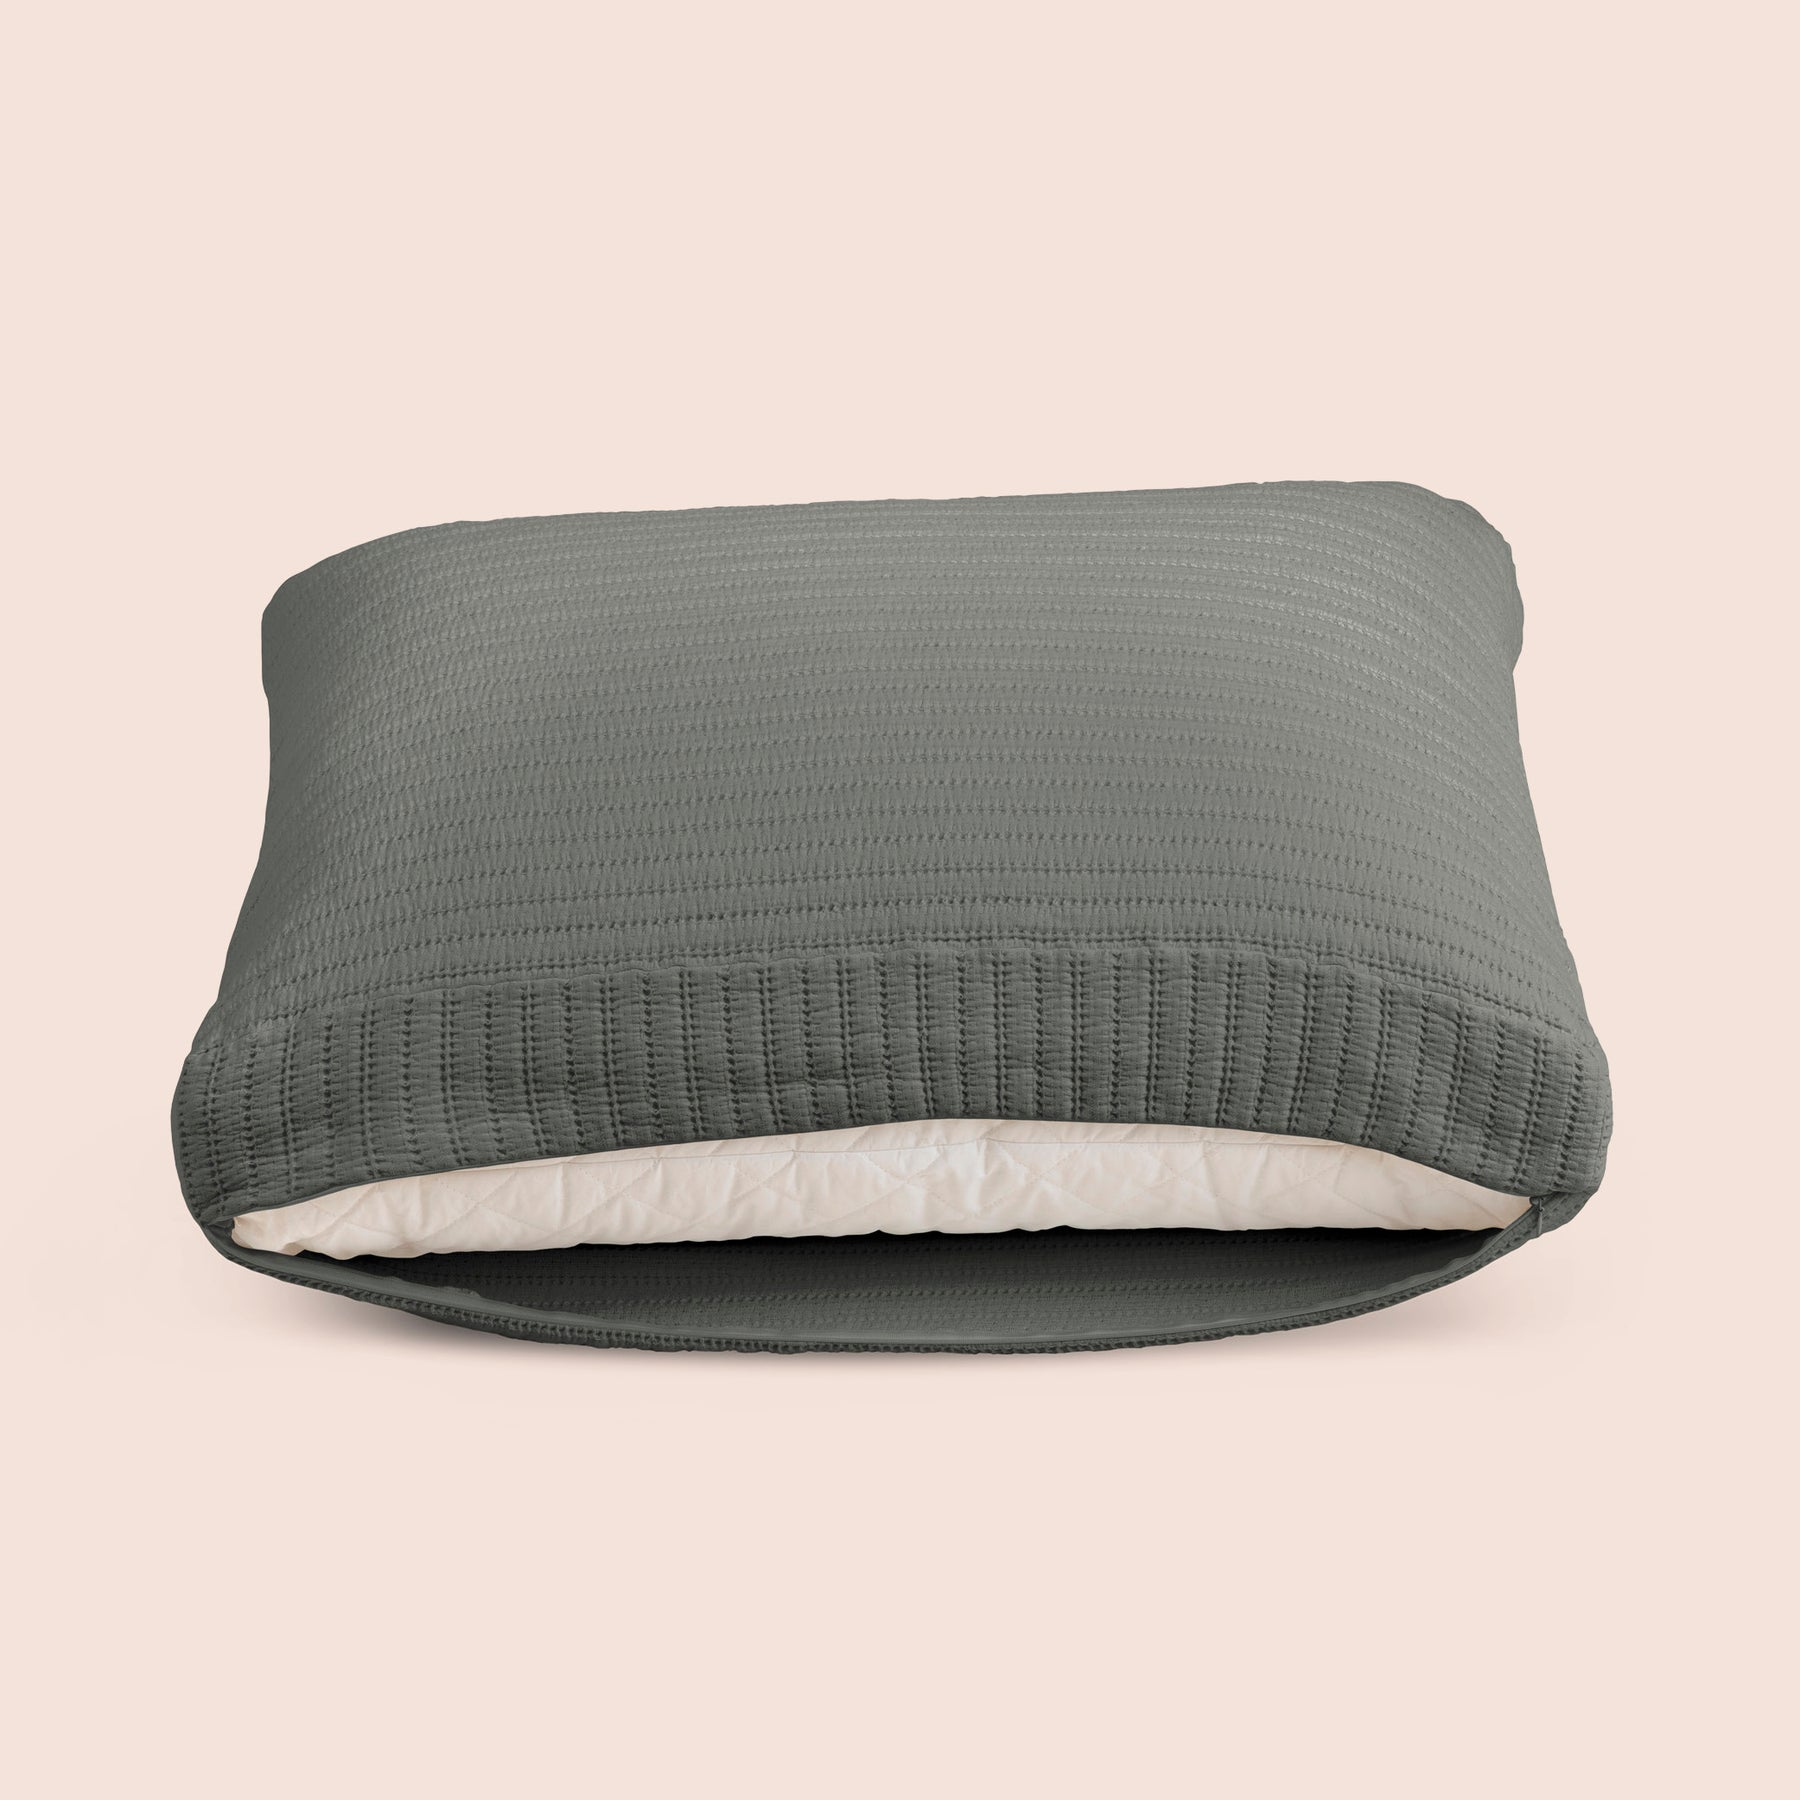 Image of the Agave Ridgeback Meditation Cushion Cover showcasing an opened zipper with a meditation cushion inside on a light pink background 